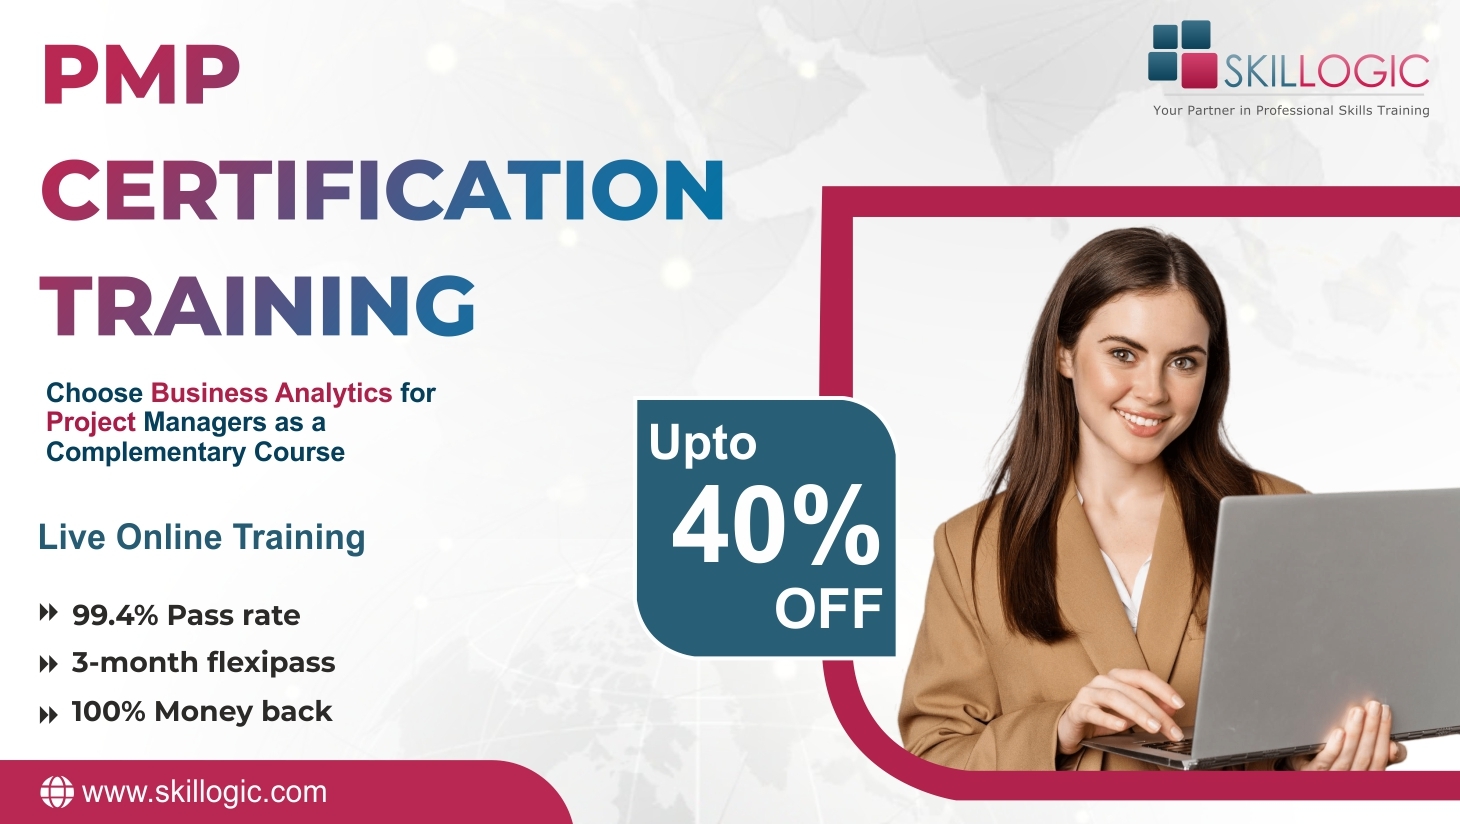 PMP Course in Chennai, Online Event